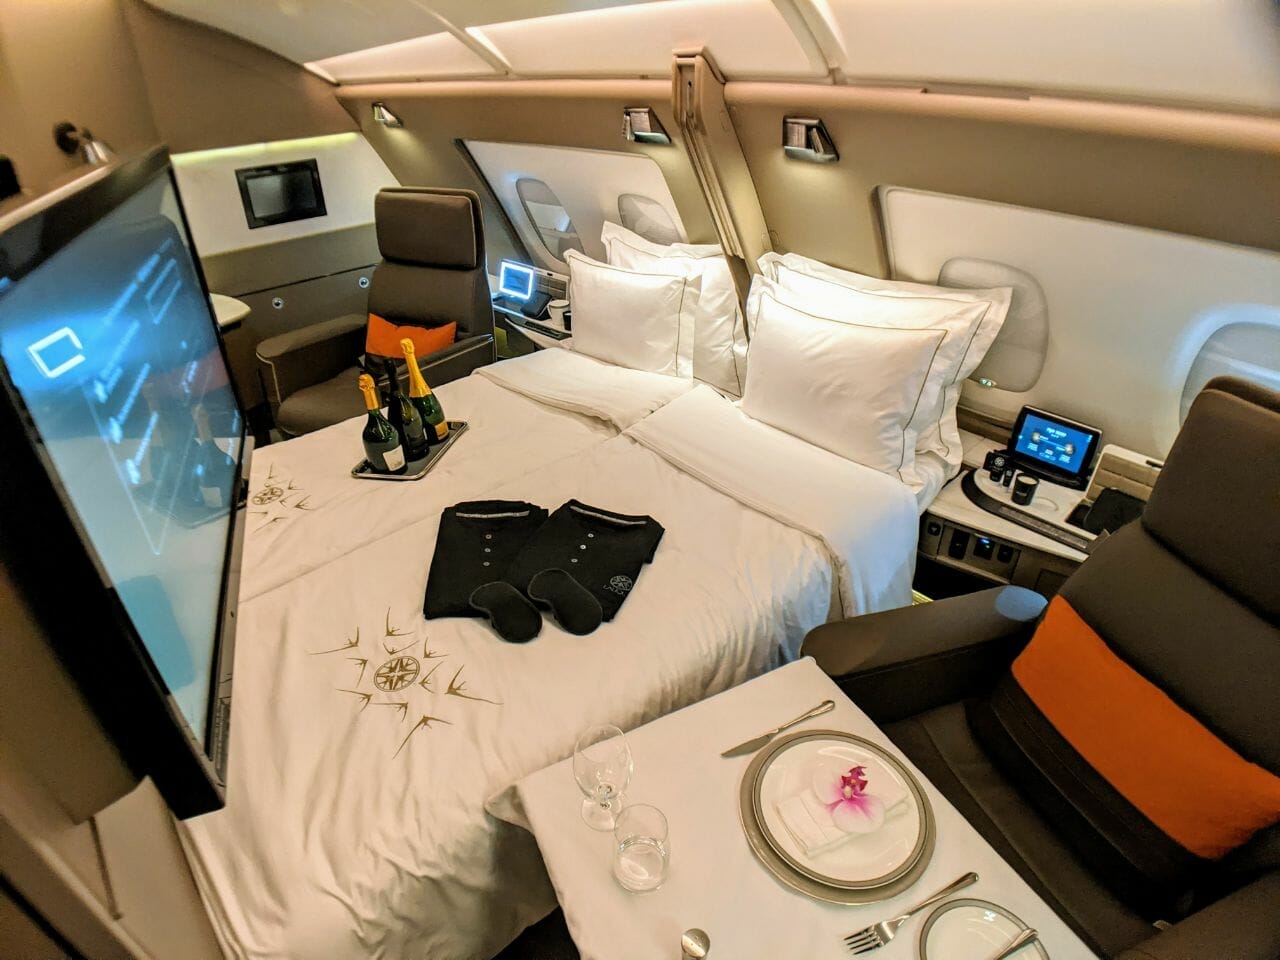 Cabin downgraded on Singapore Airlines: Now what? - The MileLion